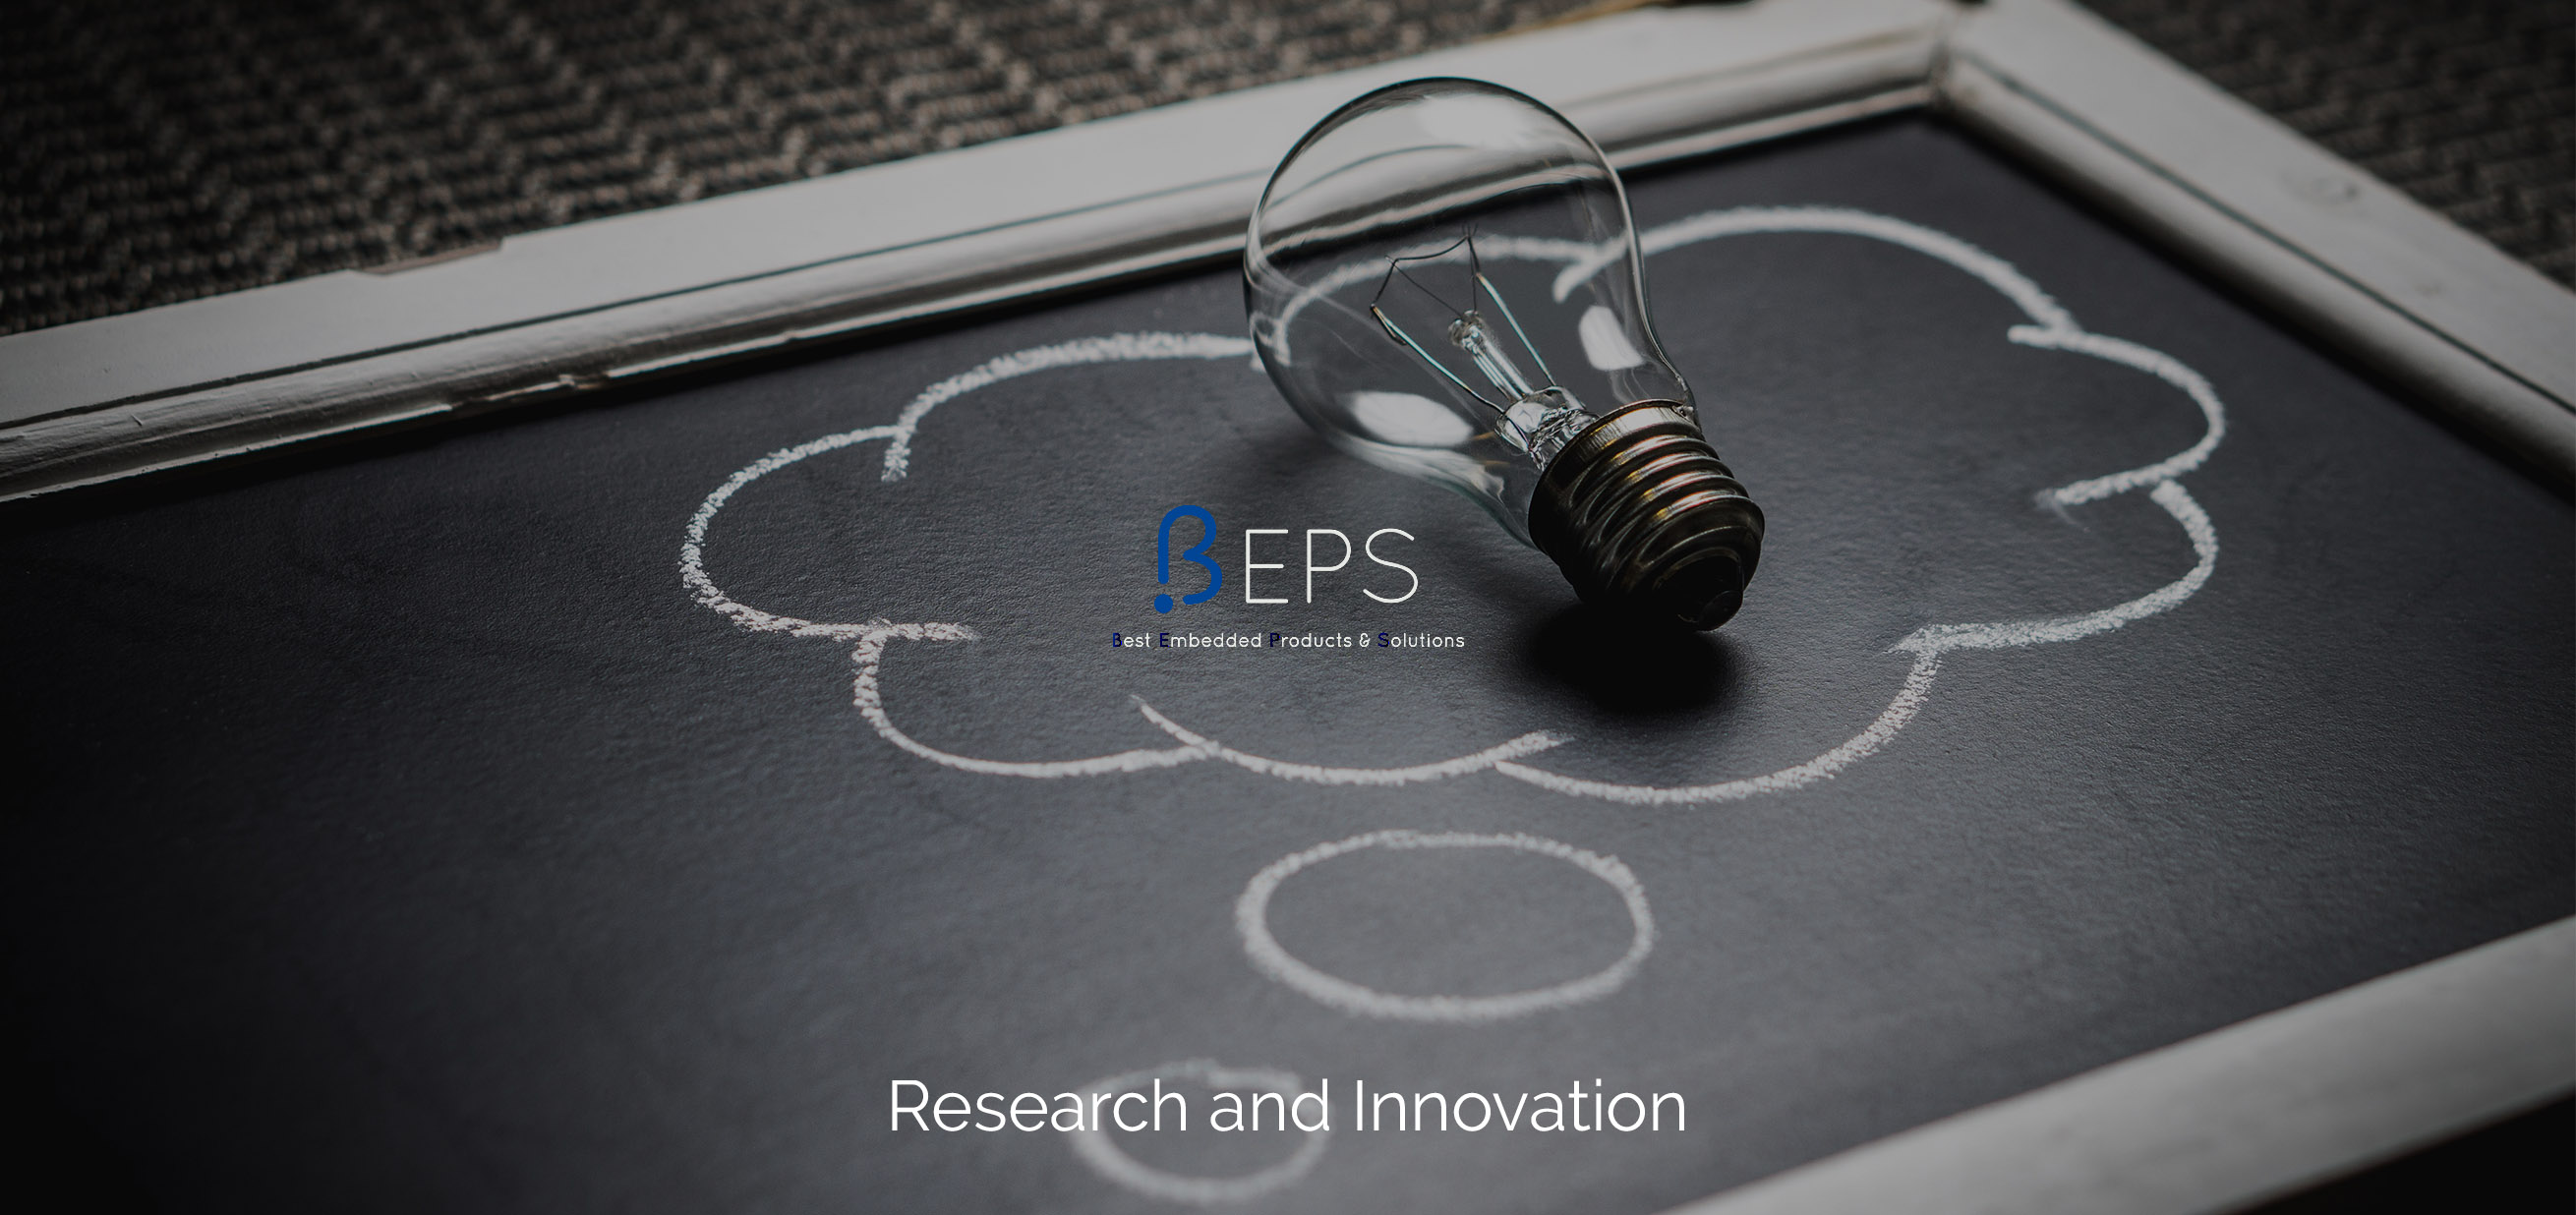 Beps Research and Innovation